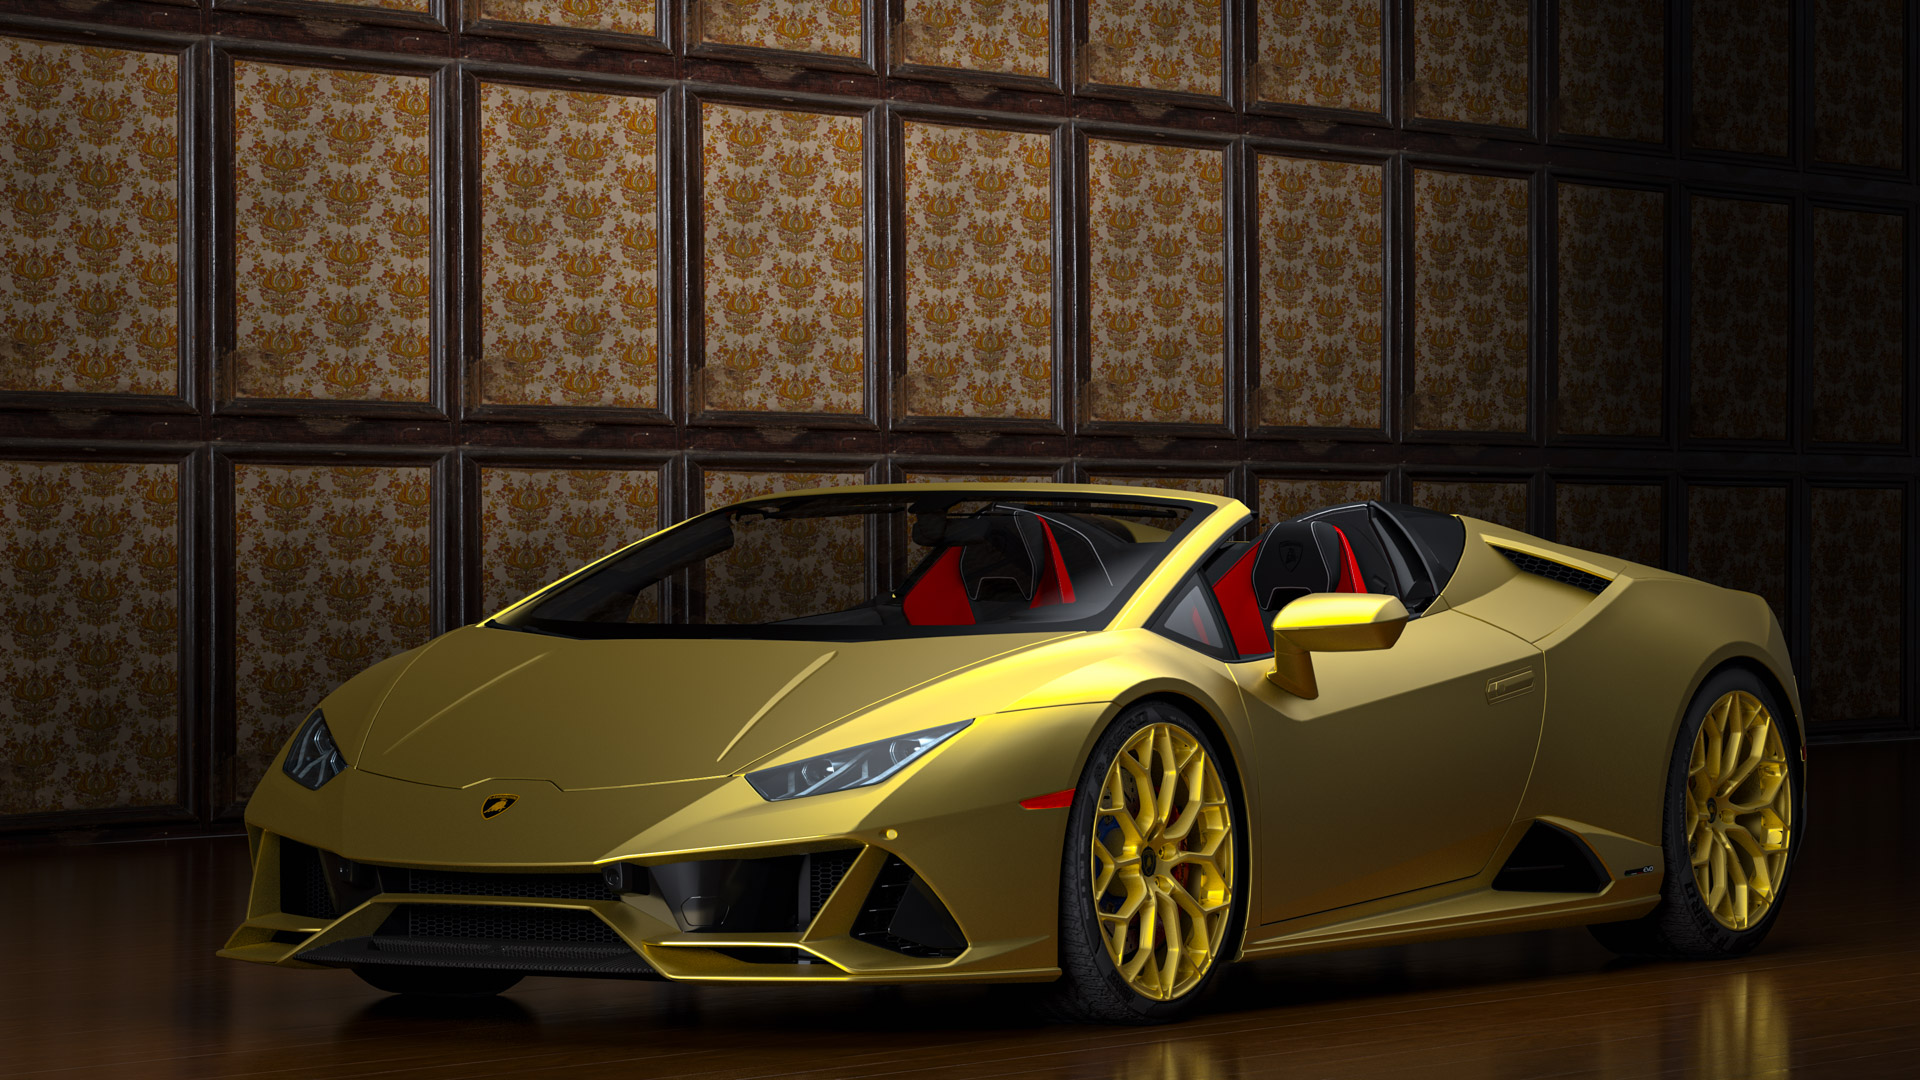 Experience the allure of the Lamborghini Huracán with full HD car wallpaper, bringing the Italian craftsmanship to your device.